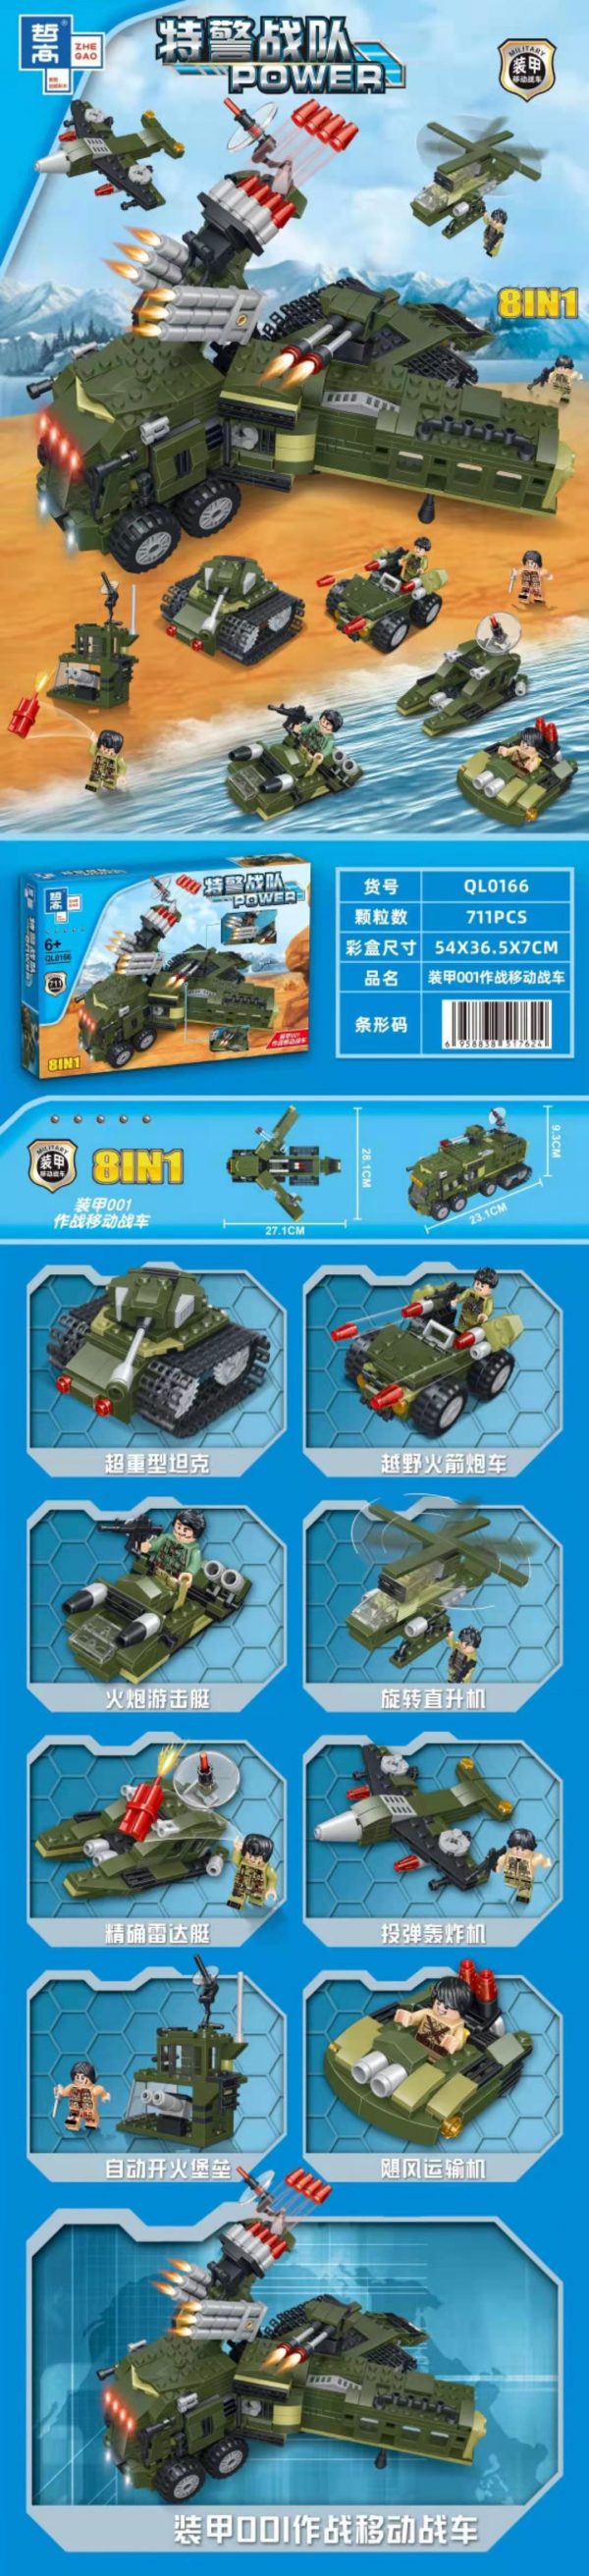 ZHEGAO QL0166 SWAT Team: Armored 001 Combat Mobile Chariot 8IN1 0